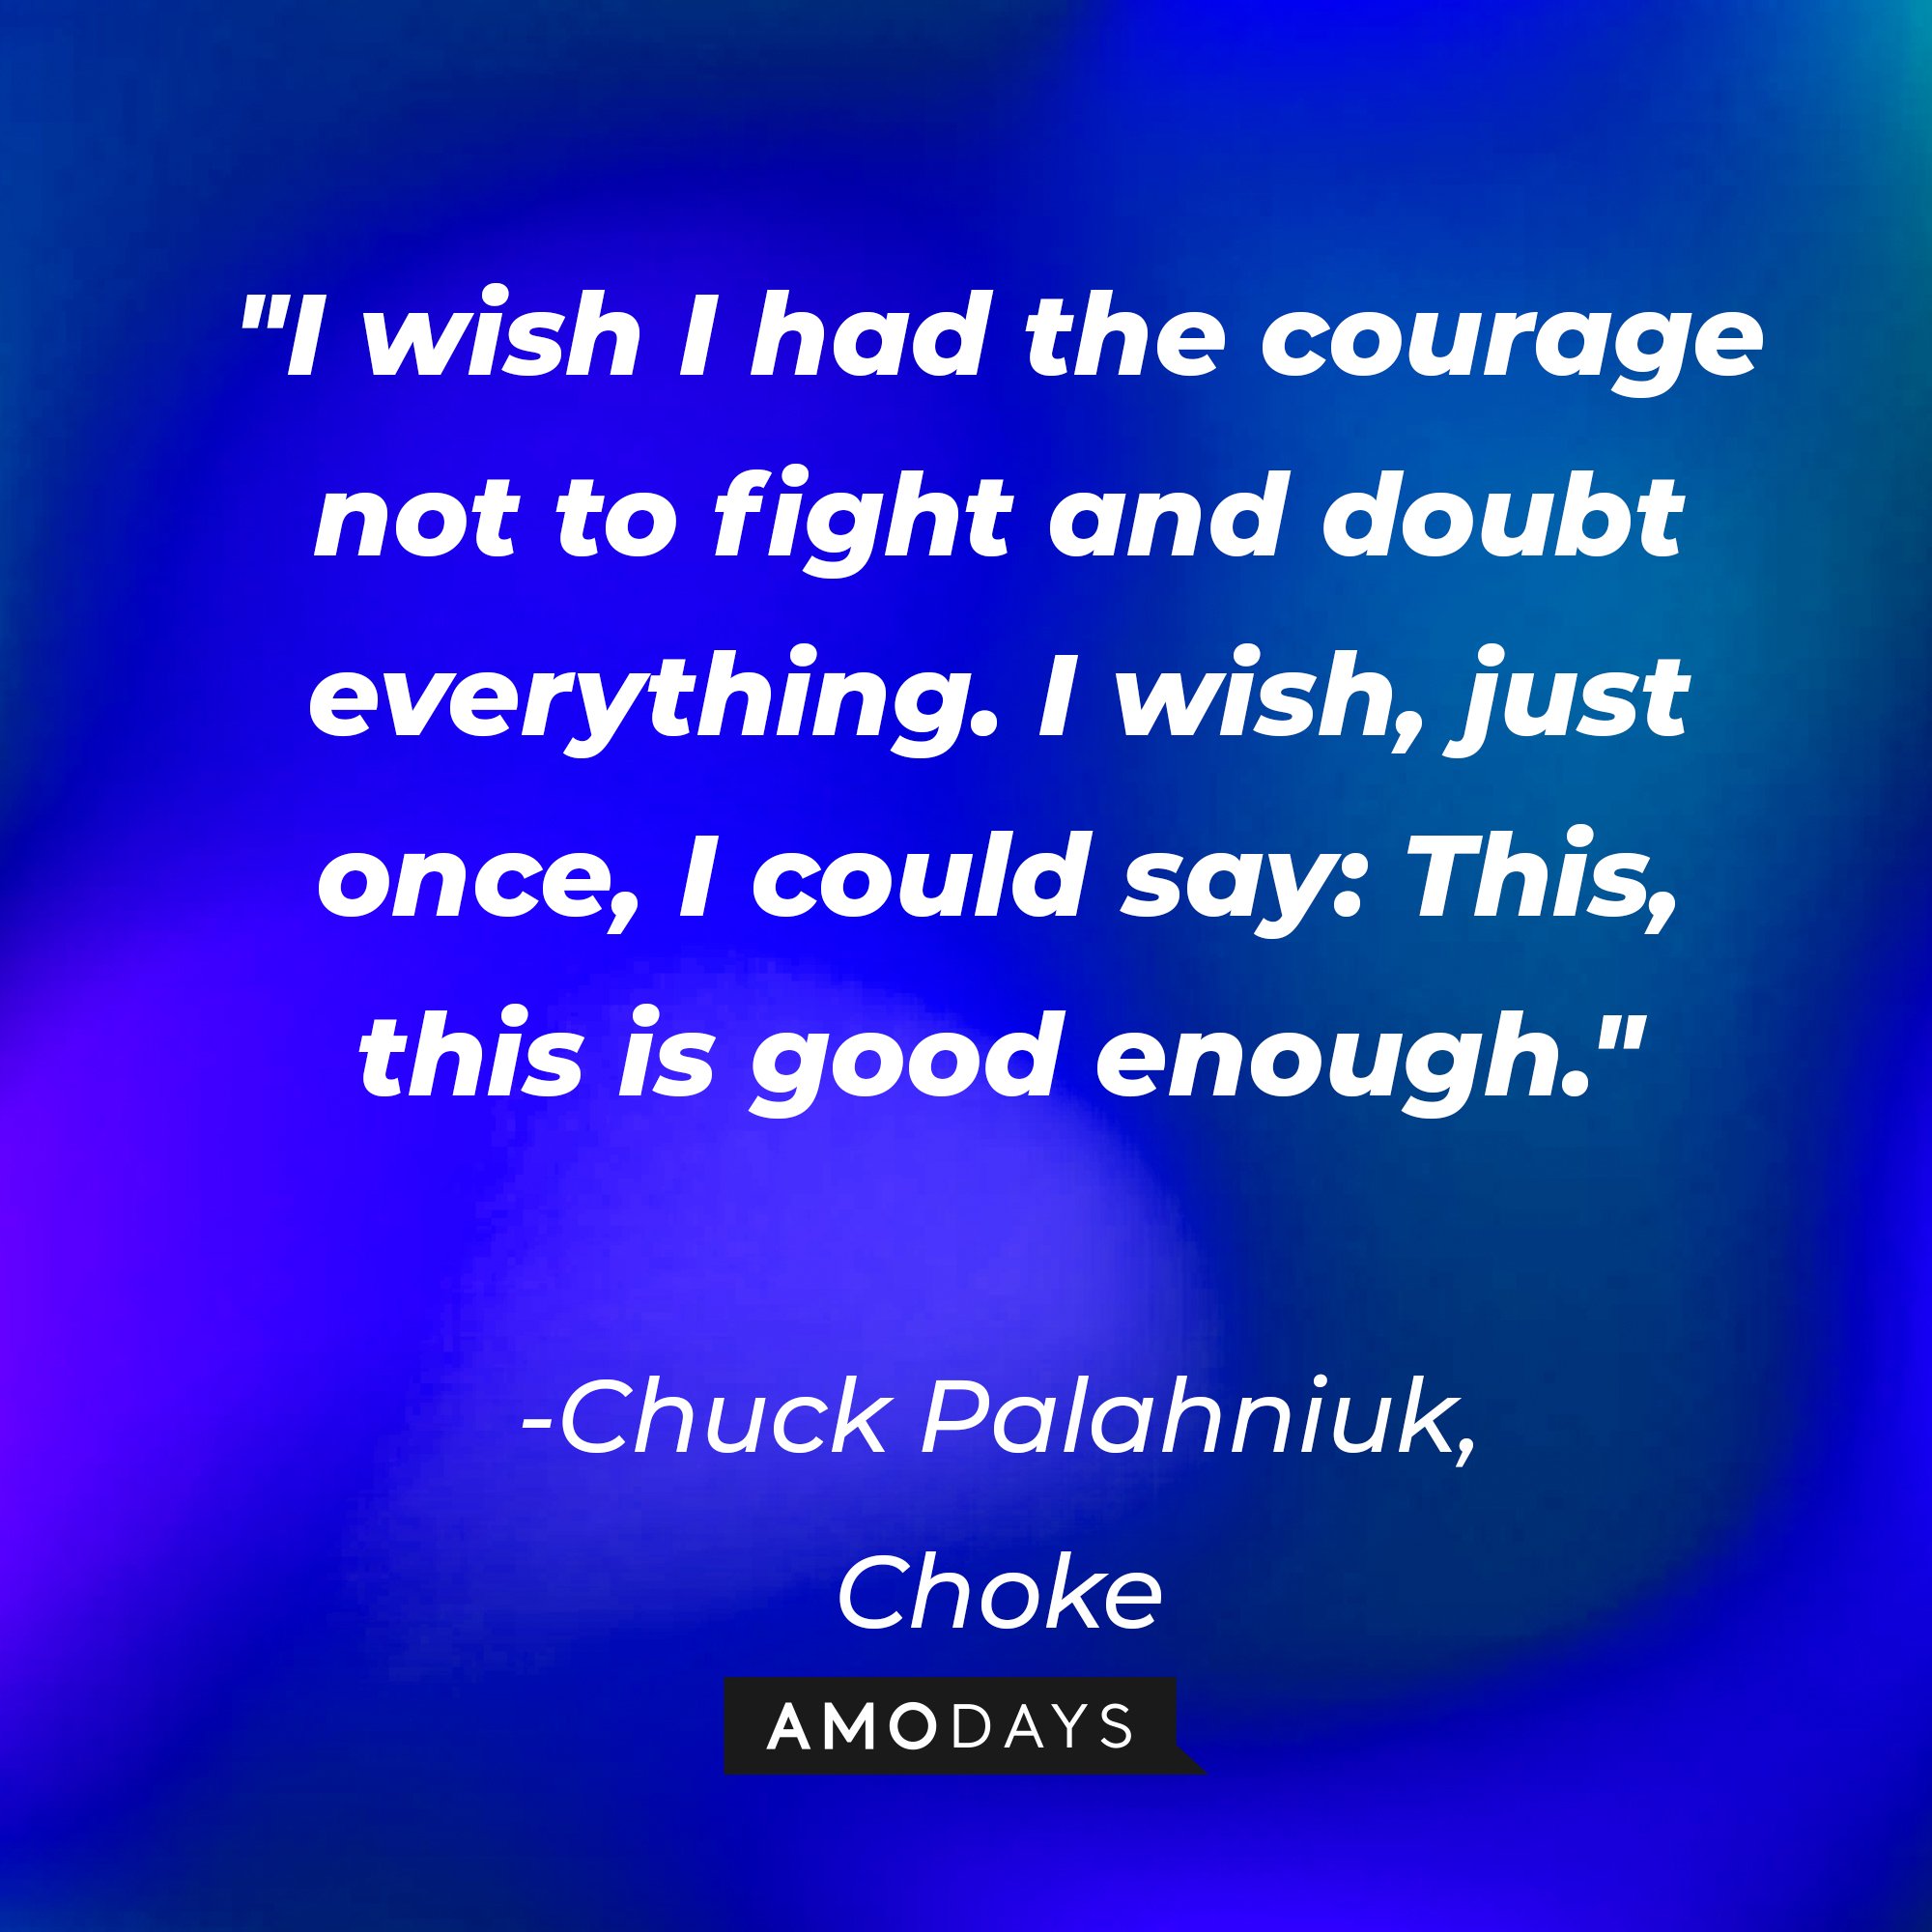 Chuck Palahniuk's quote: "I wish I had the courage not to fight and doubt everything. I wish, just once, I could say: This, this is good enough." | Image: Amodays